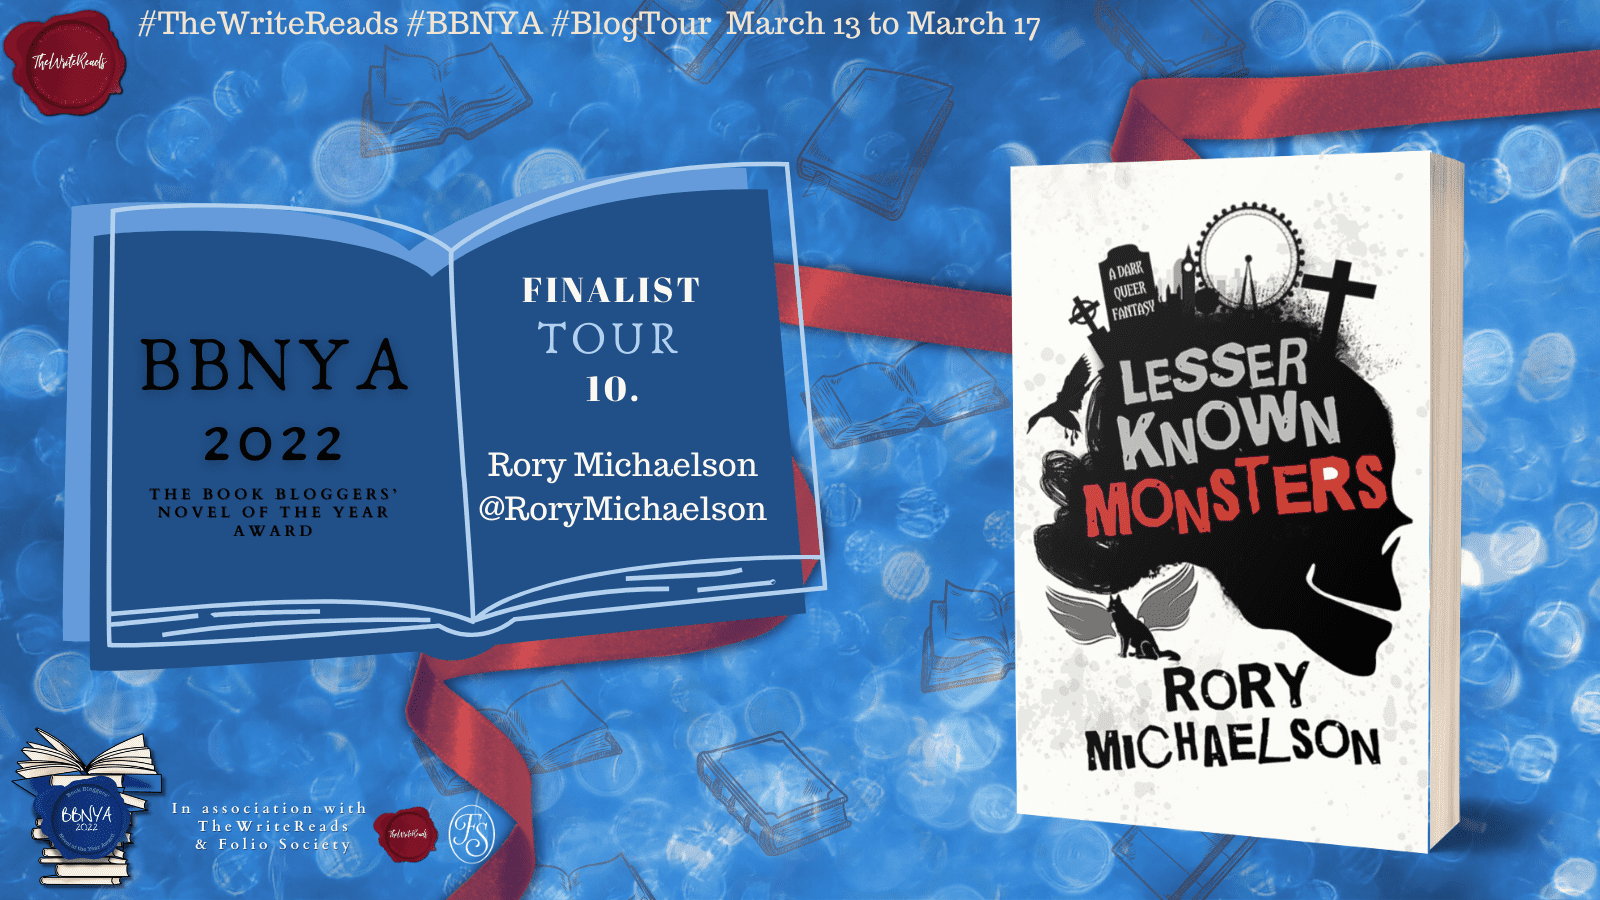 BBNYA Winner's Tour: #10 ~ Lesser Known Monsters by Rory Michaelson | Dark Queer Fantasy with Found Family